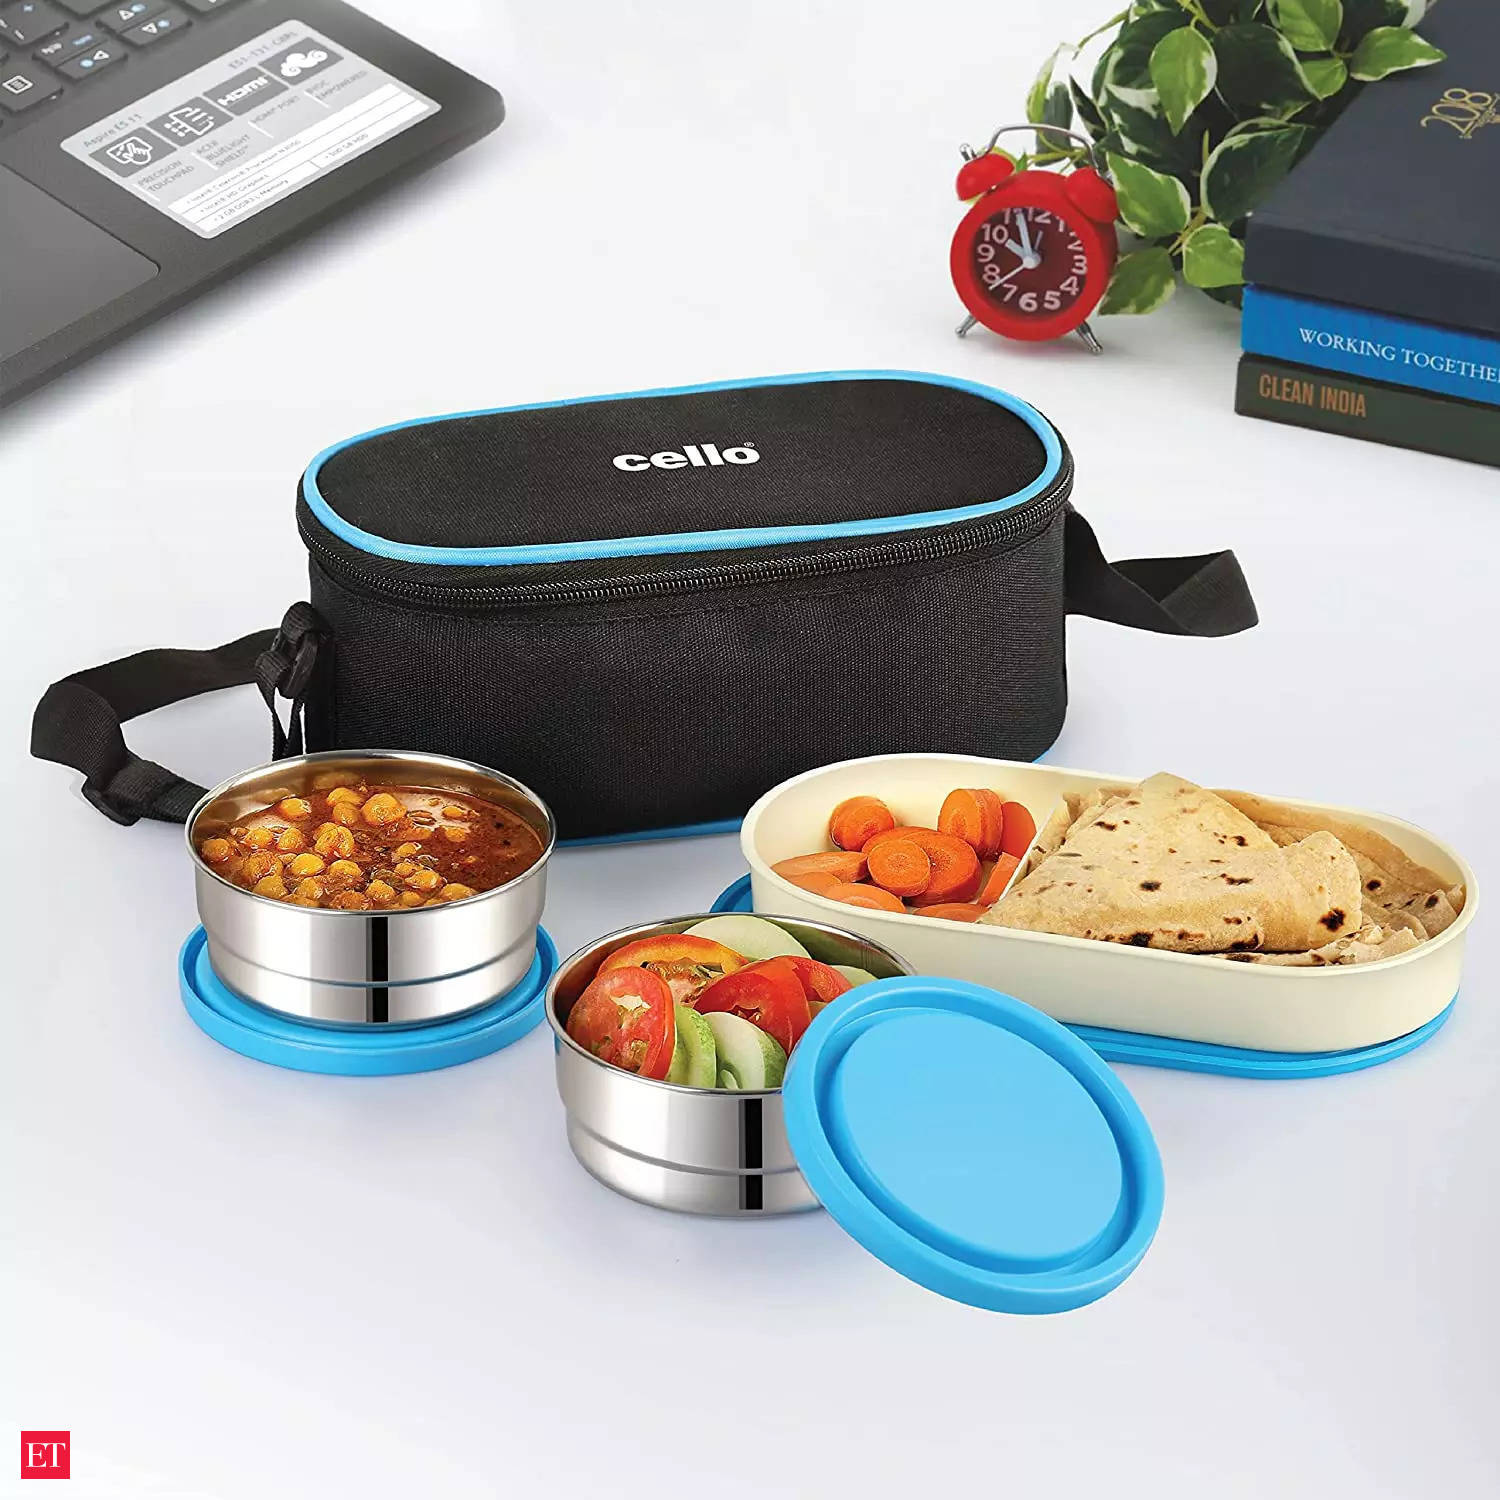 Stainless steel lunch box: Get yourself The Best Stainless Steel Lunch Box  For Office In India - The Economic Times